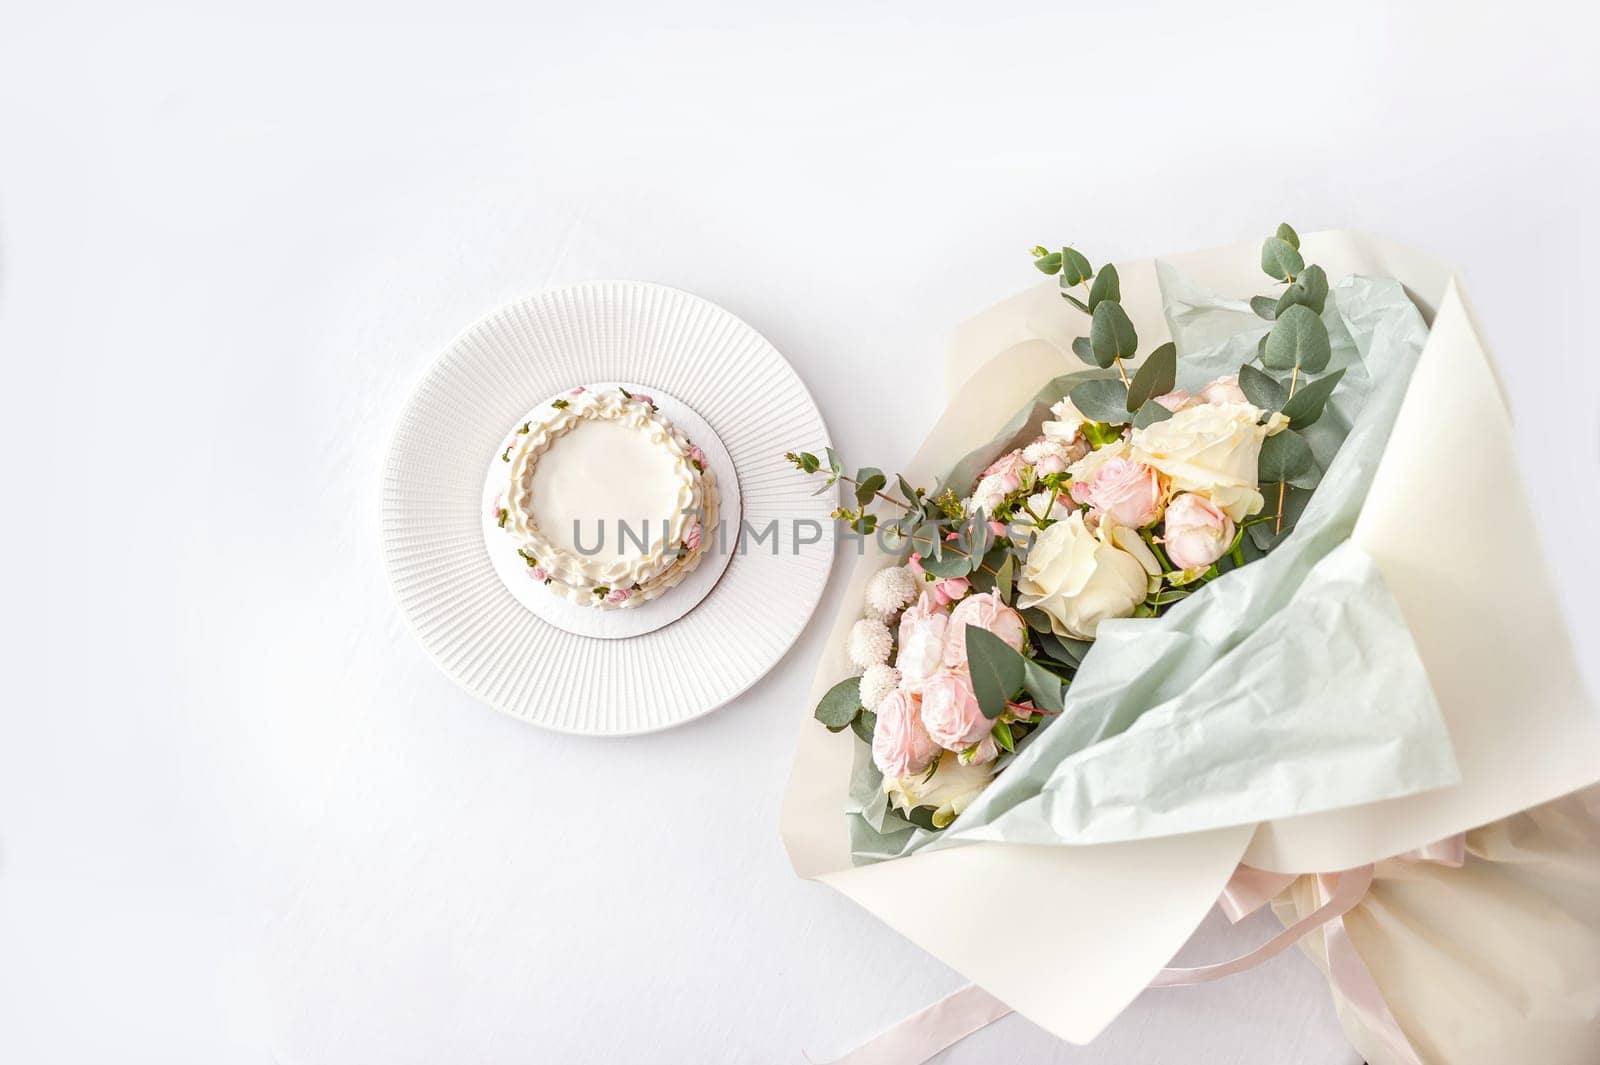 Festive bento cake and bouquet on a light background by bizzyb0y